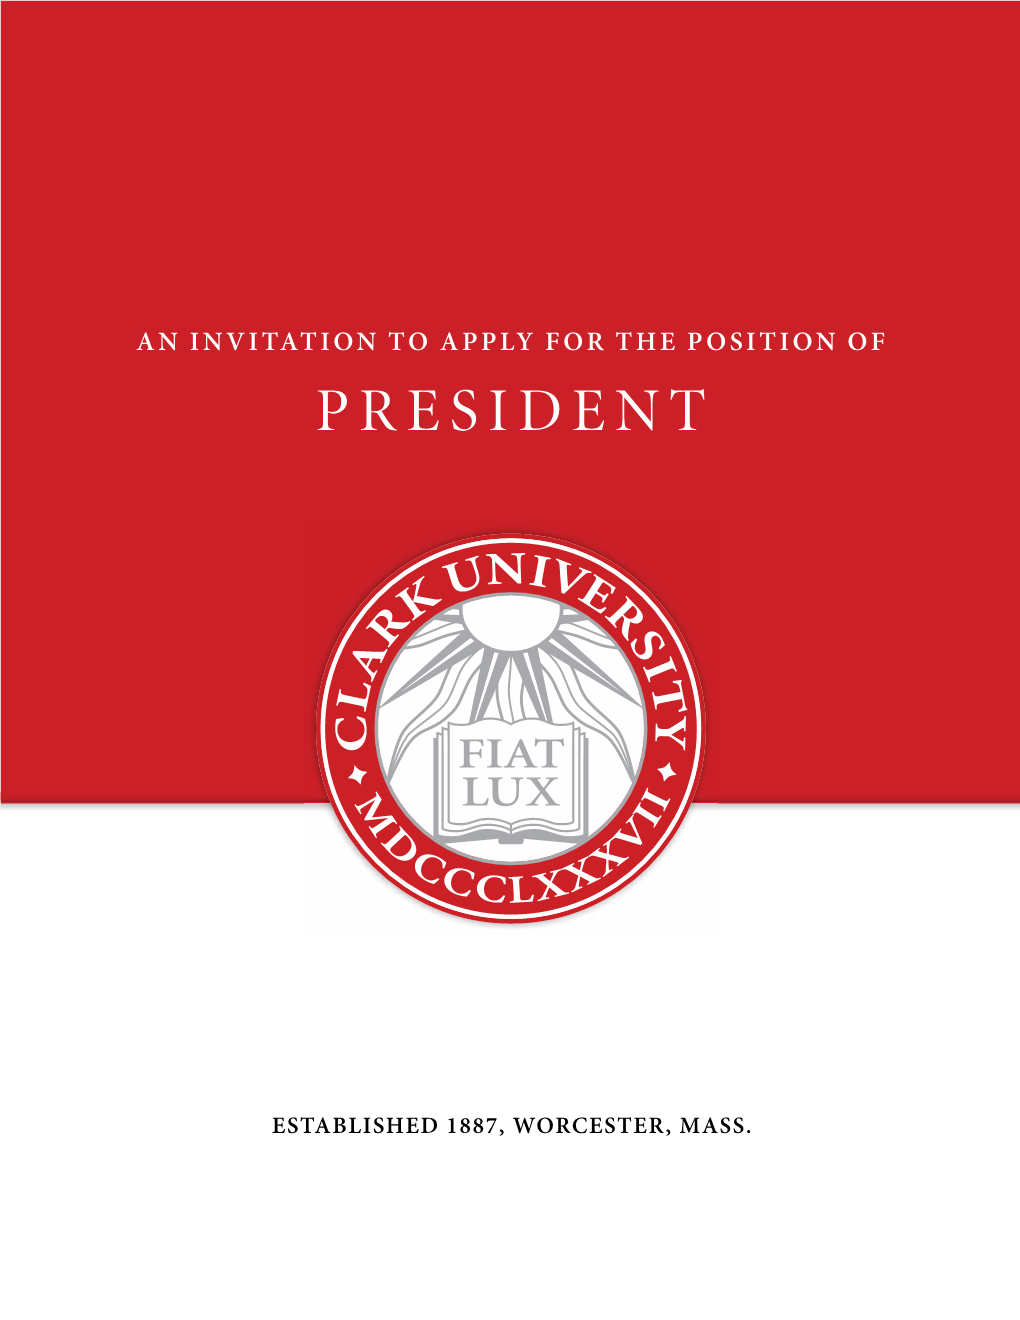 An Invitation to Apply for the Position of President